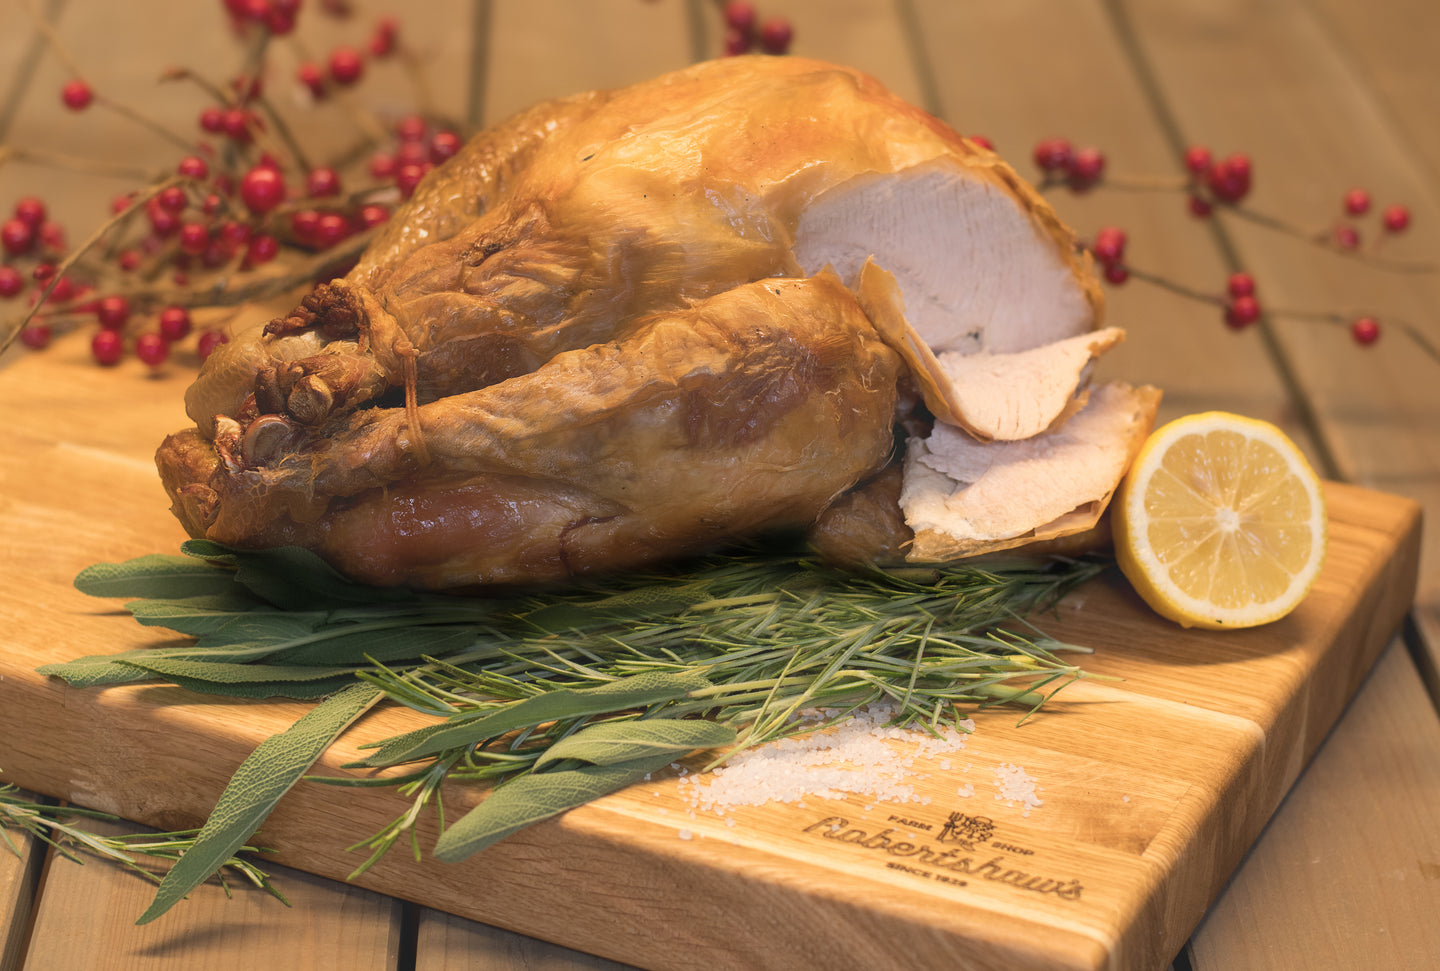 Picture of cooked yorkshire turkey on chopping board with herbs